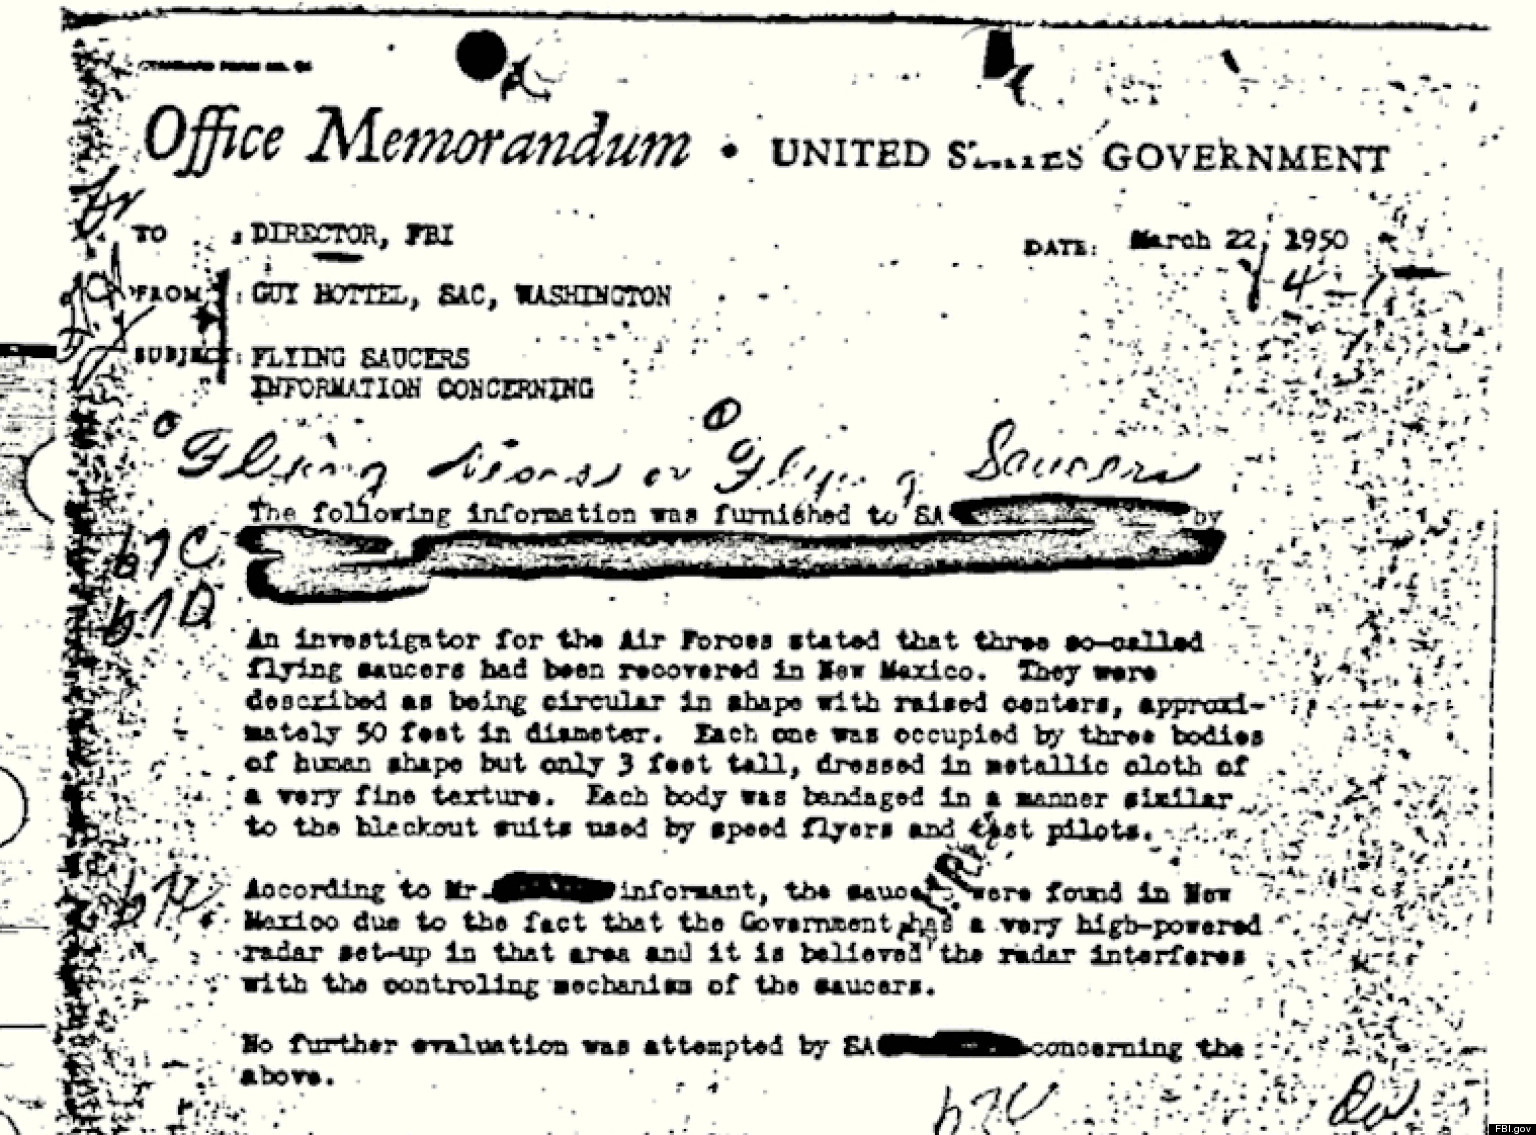 FBI UFO Document Is The Most Popular Of All Its 'Vault' Files | HuffPost